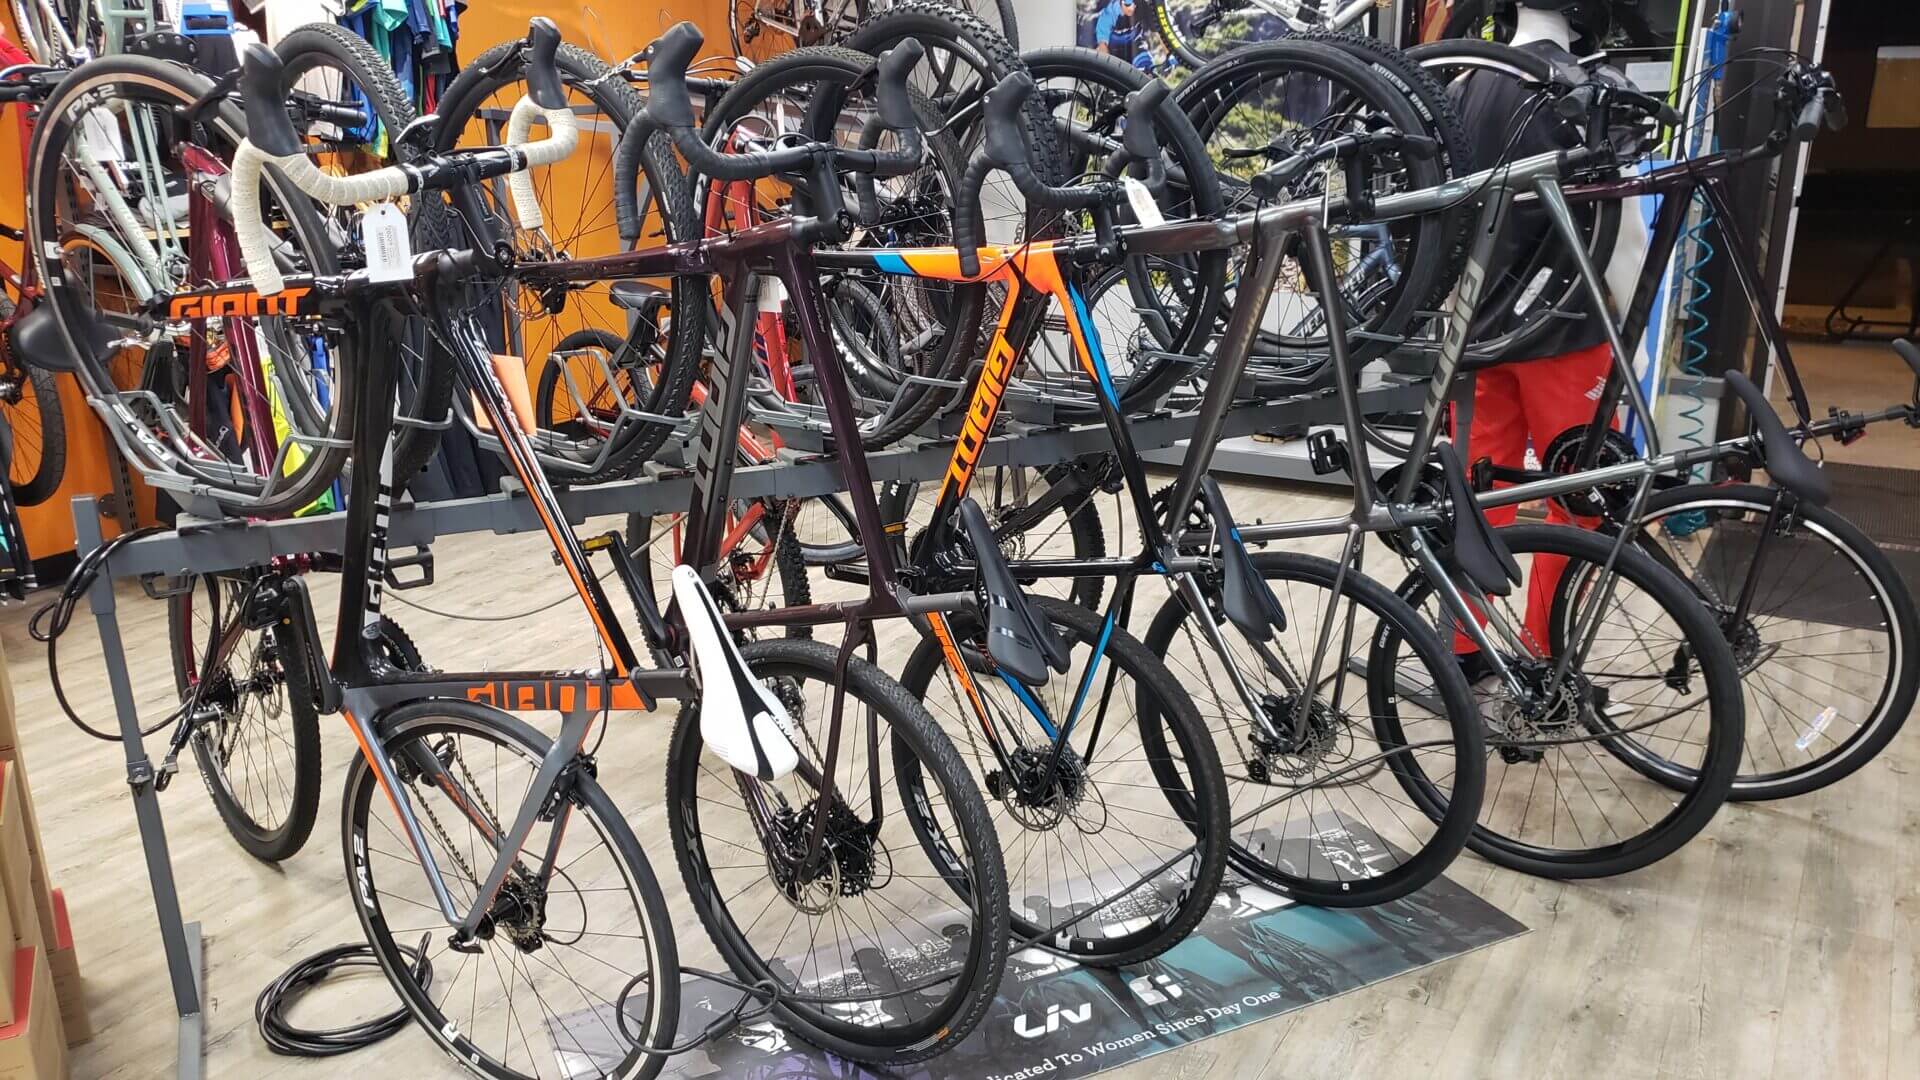 A collection of tough bike at an outlet